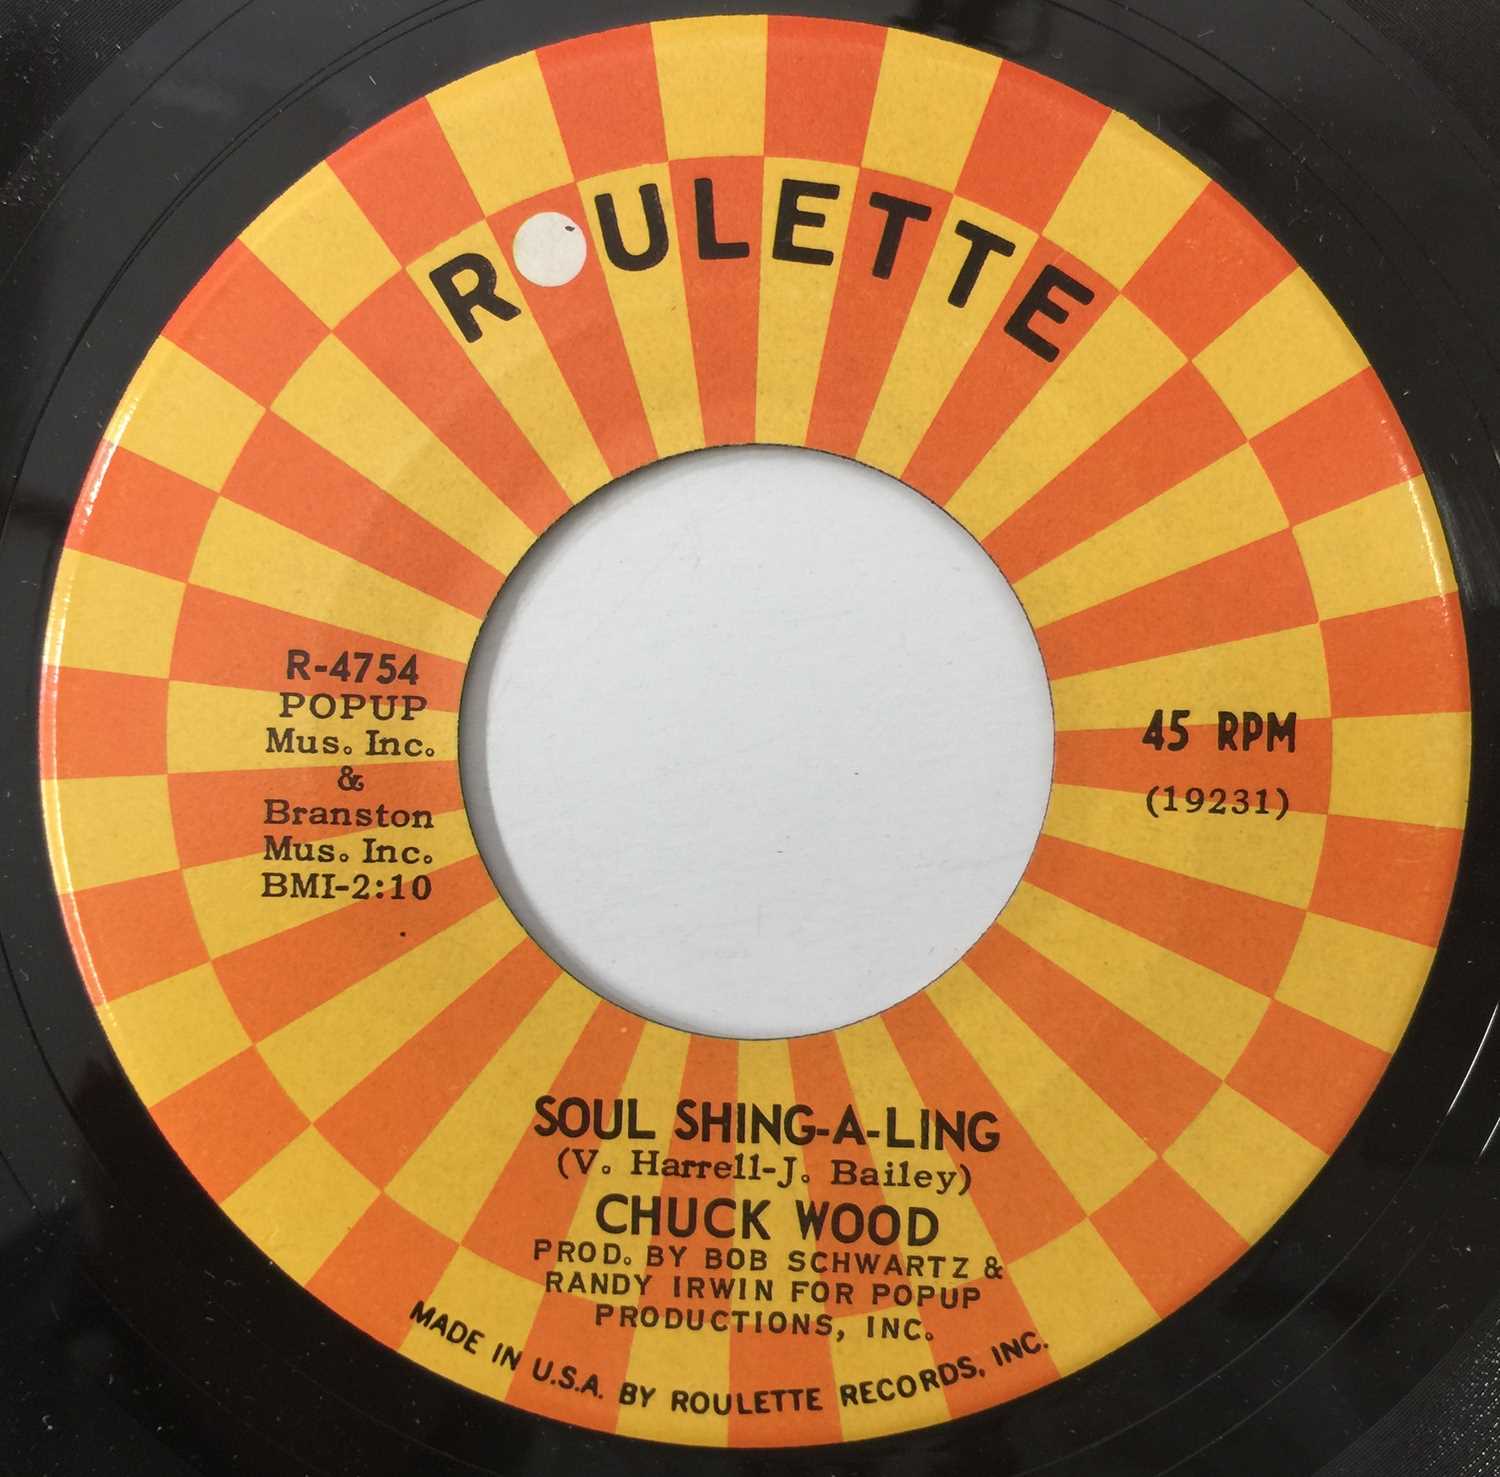 CHUCK WOOD - SEVEN DAYS TOO LONG/ SOUL SHING-A-LING 7" (US STOCK - ROULETTE - R-4754) - Image 2 of 2